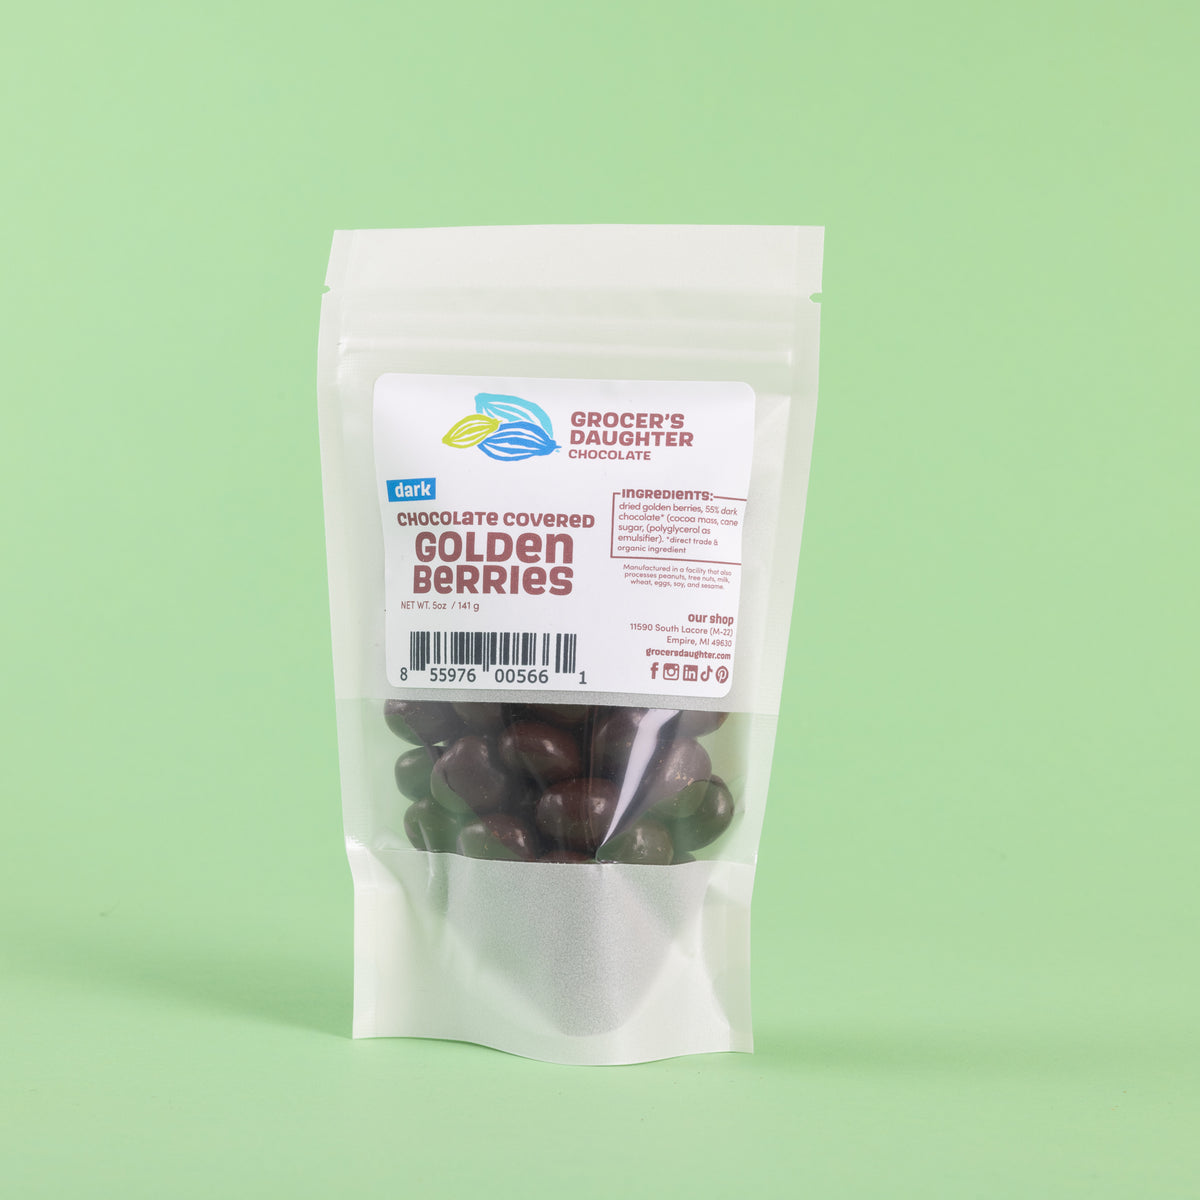 Chocolate Covered Golden Berries